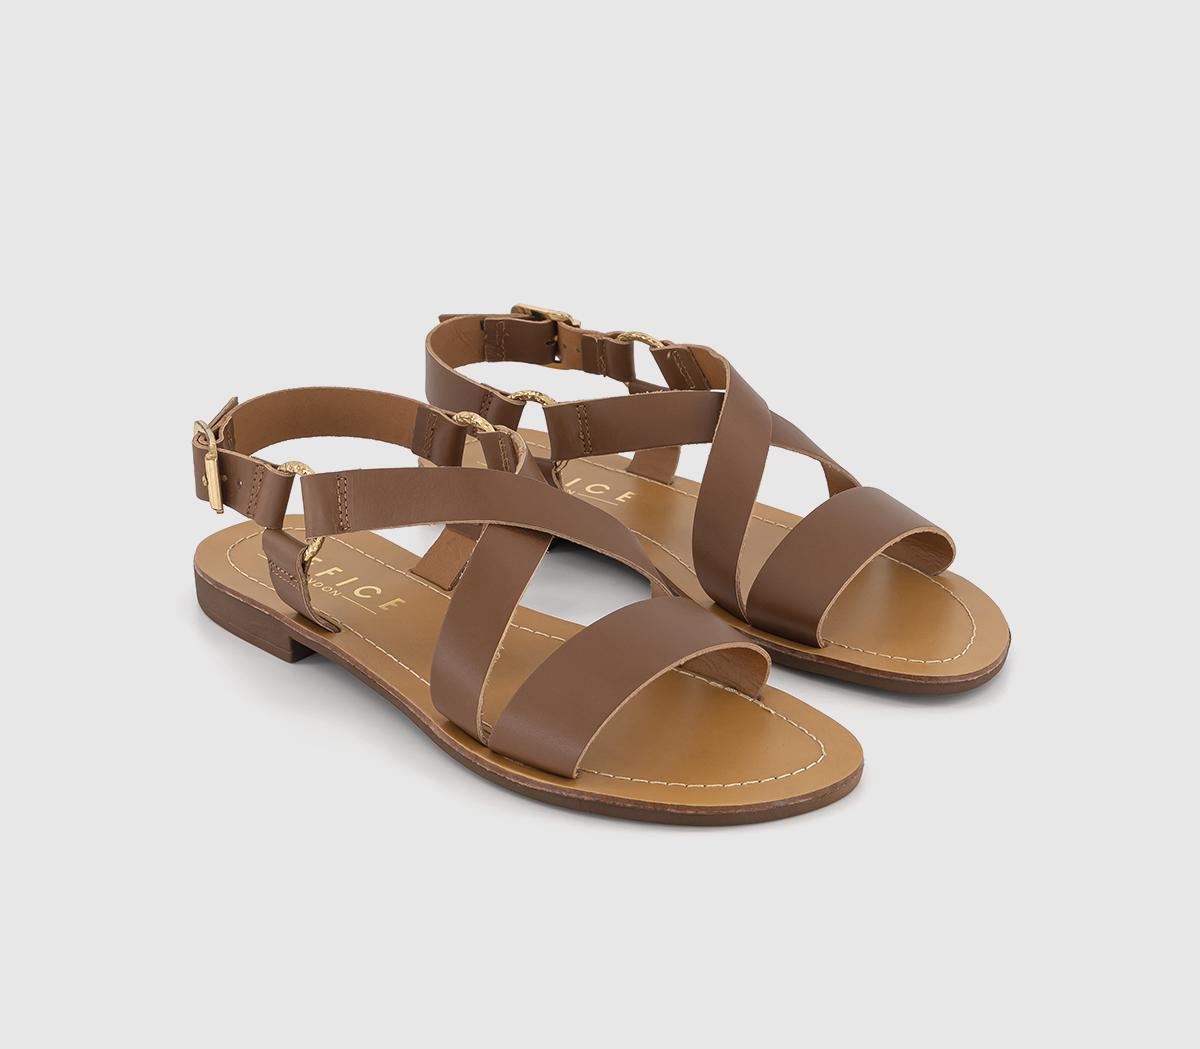 OFFICE Womens Sequence Cross Over Flat Sandals Tan Leather, 9